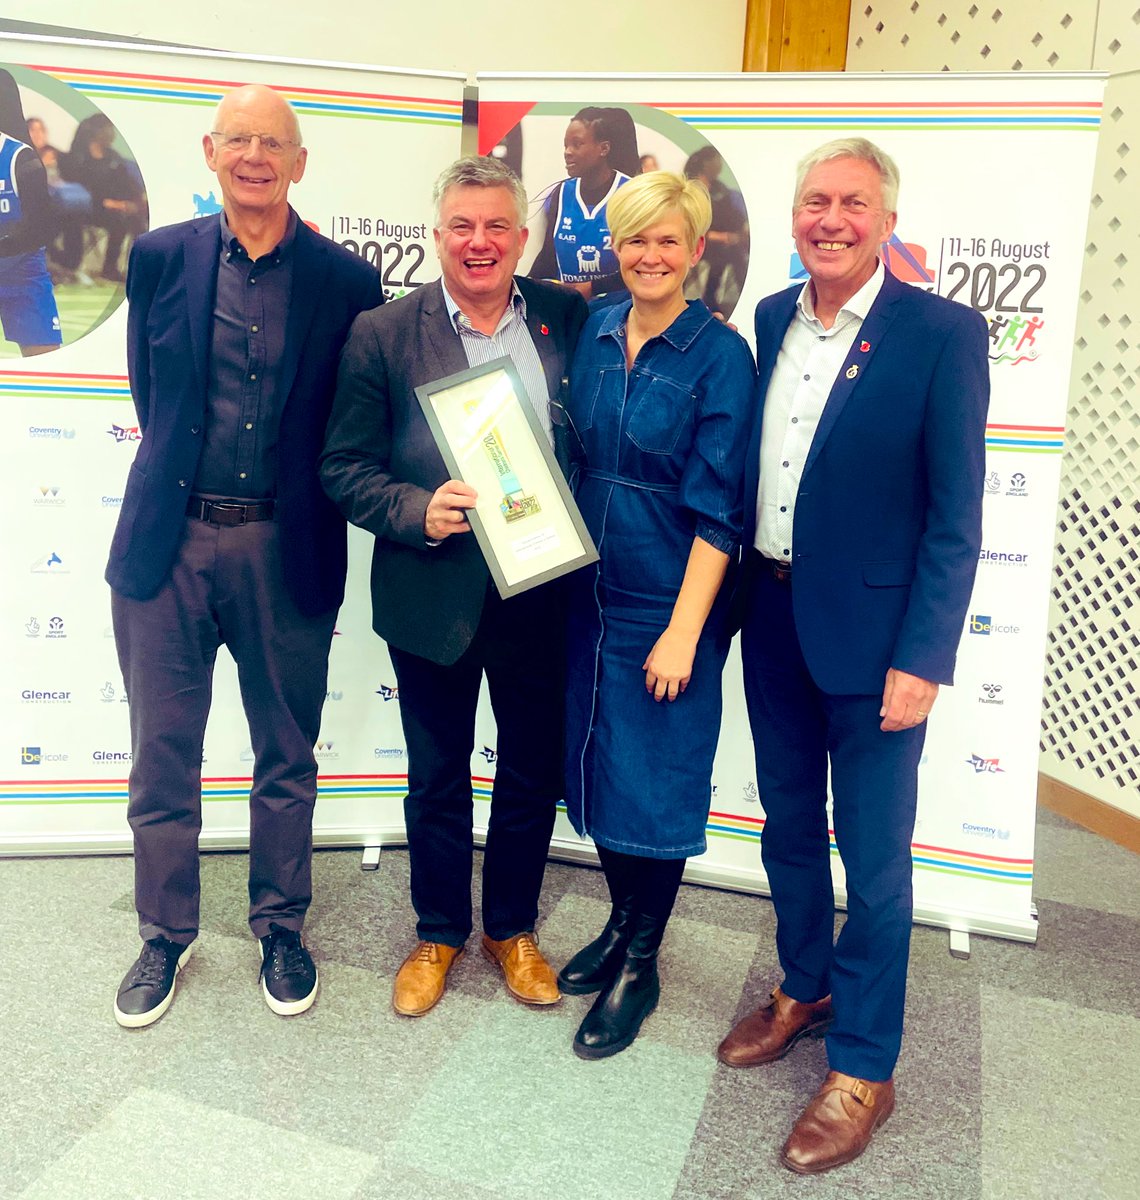 Proud to be acknowledged for the amazing ceremonies @coventryicg2022 Thanks @CovSport & well done for all your hard work @coventrycc #memoriesmade @cvlifenews